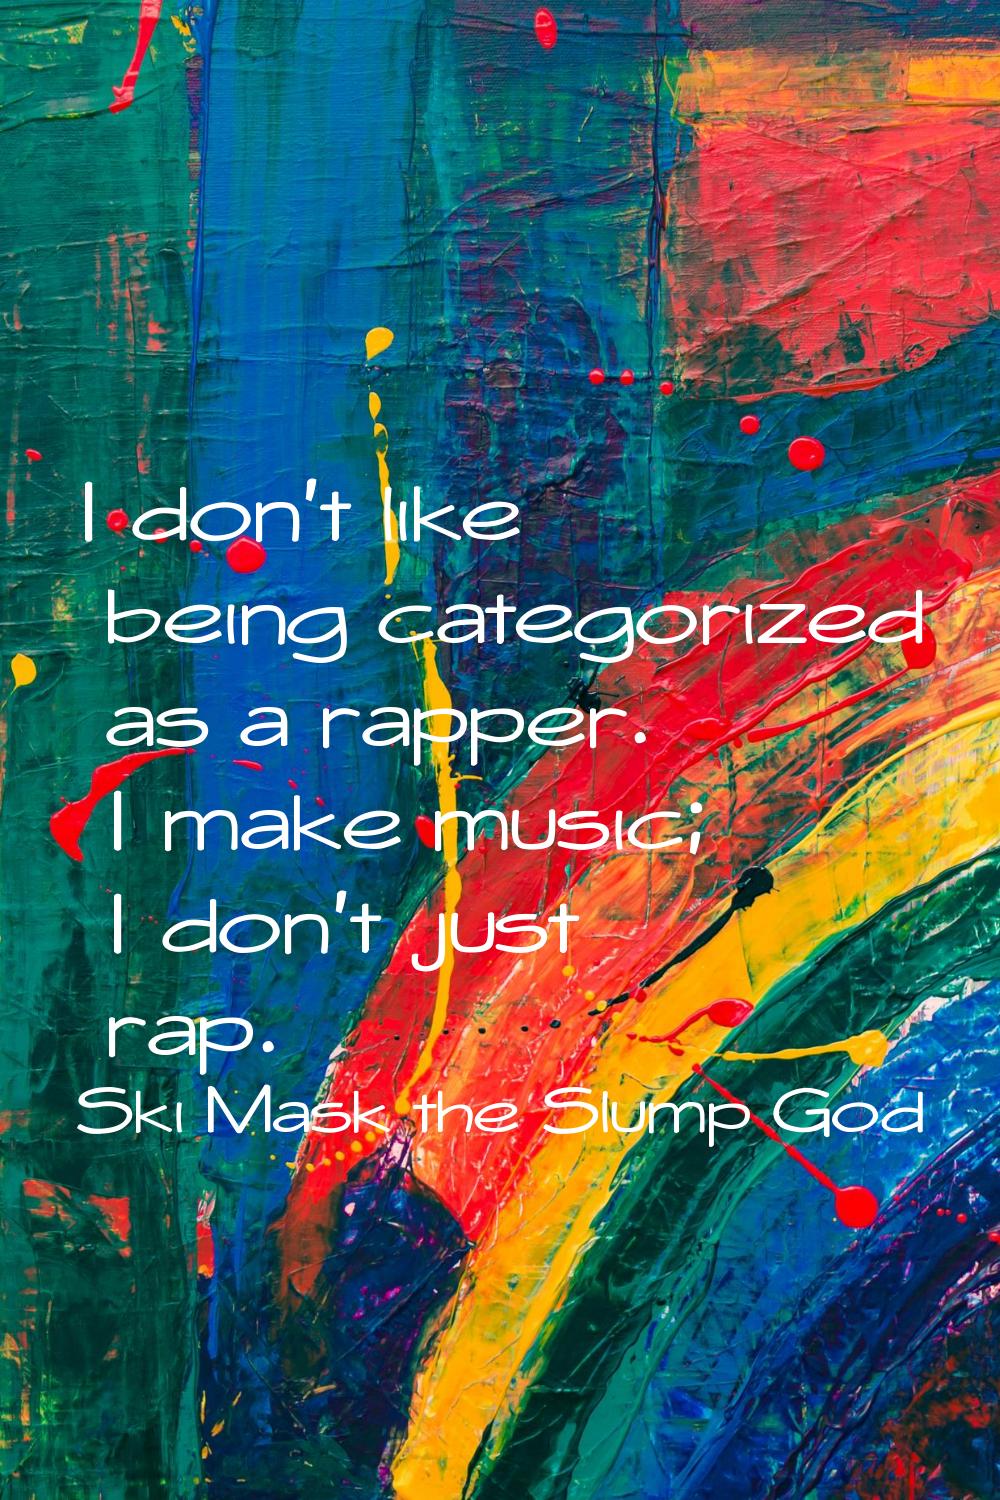 I don't like being categorized as a rapper. I make music; I don't just rap.